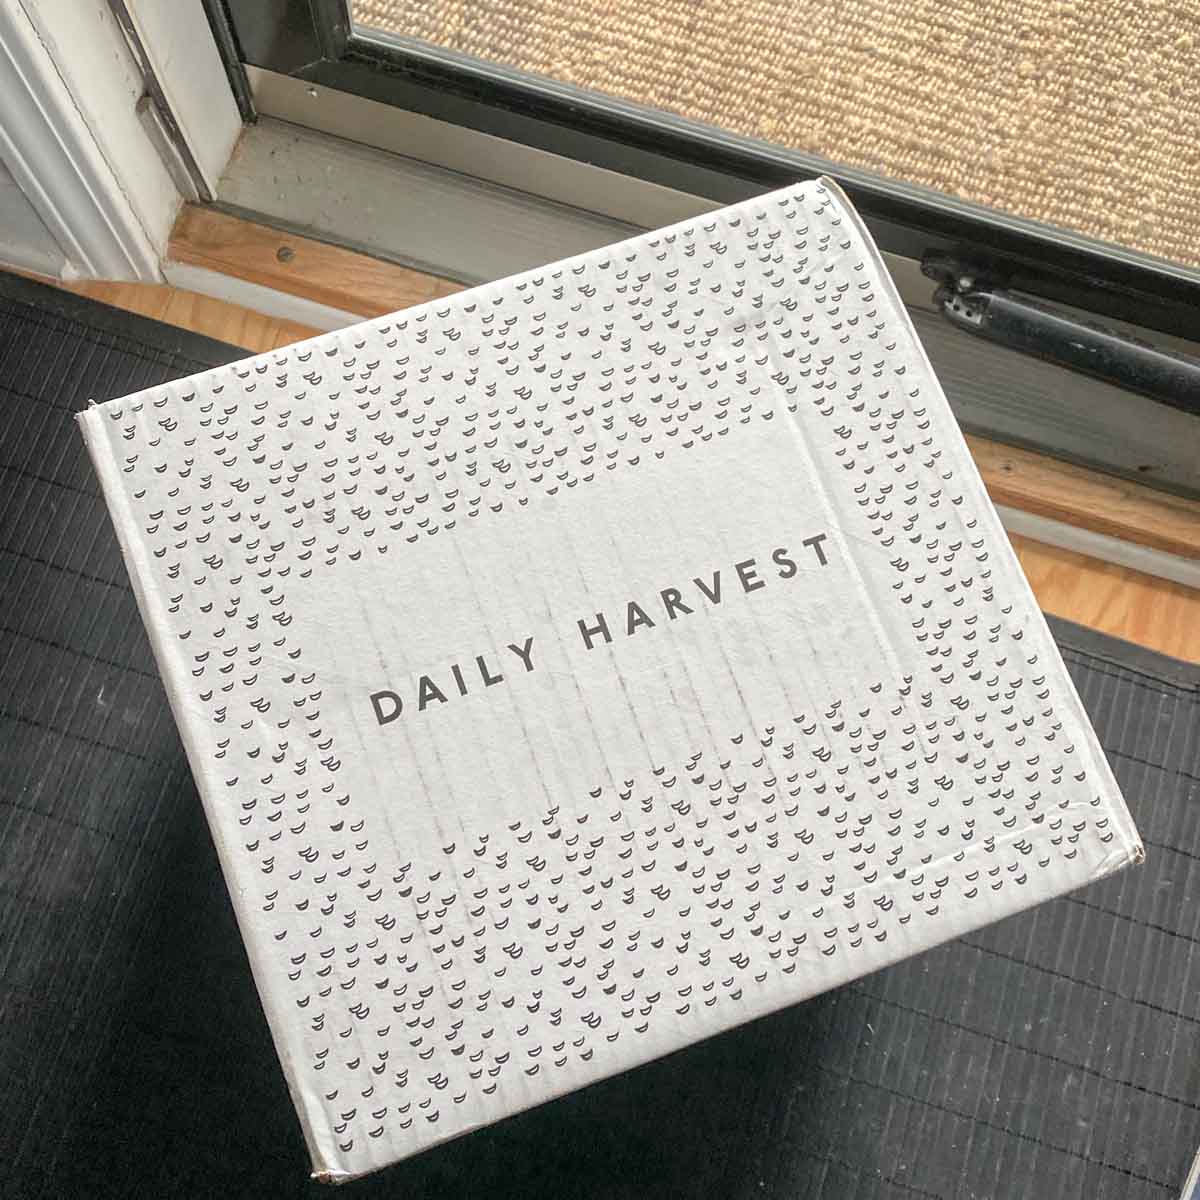 Daily Harvest Review and Discount Code Trial and Eater